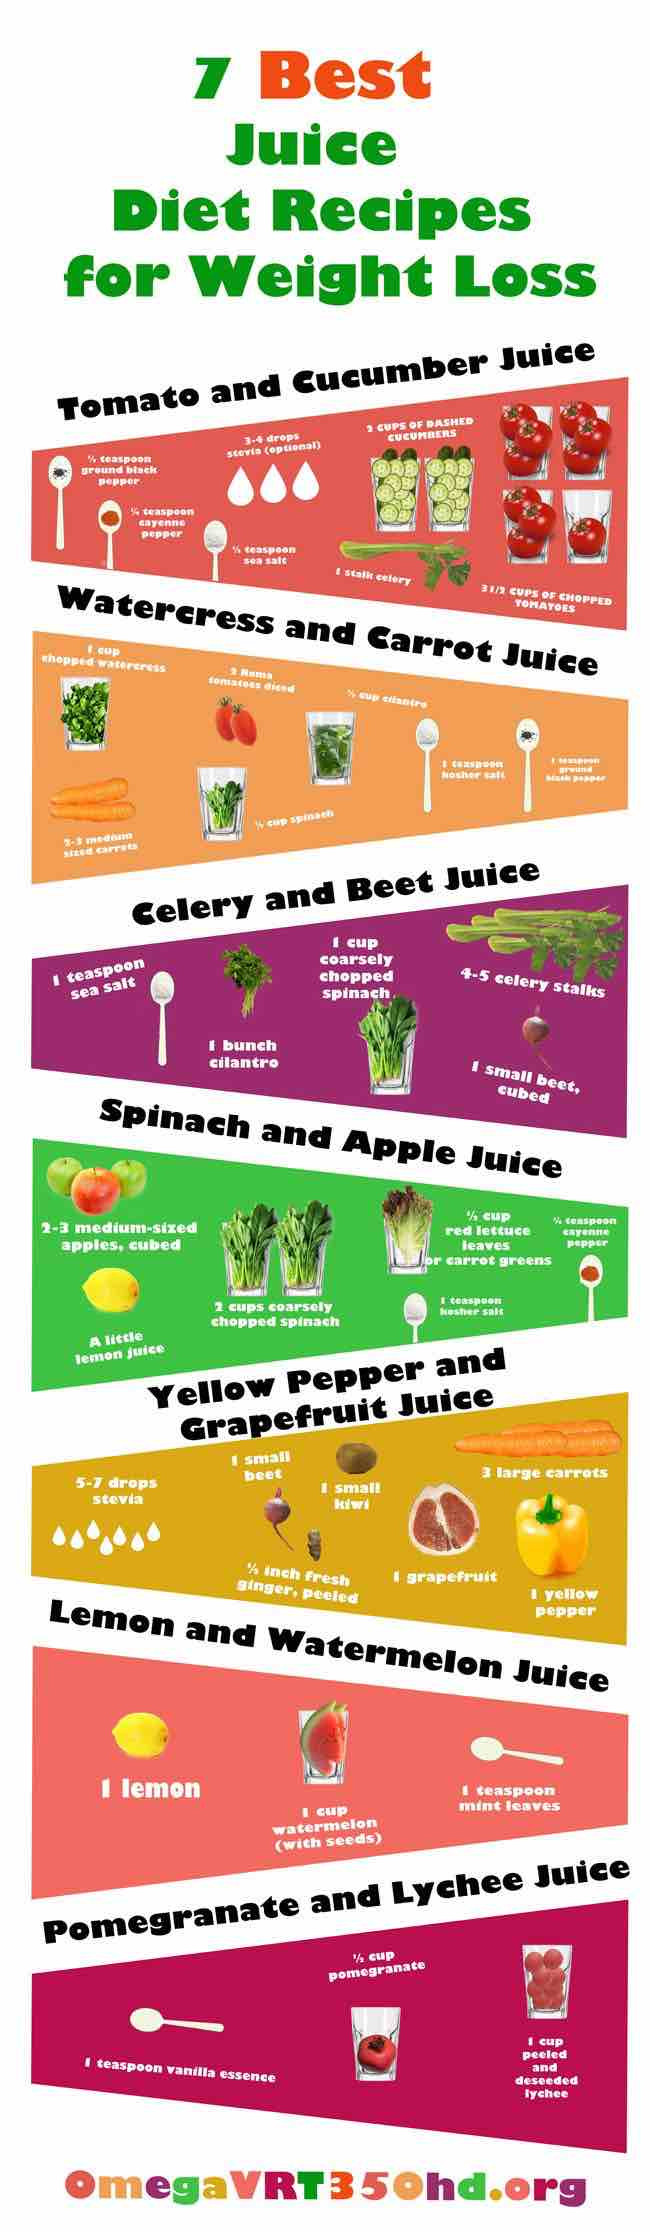 Juice Recipes For Weight Loss
 Juicing Recipes for Detoxing and Weight Loss MODwedding